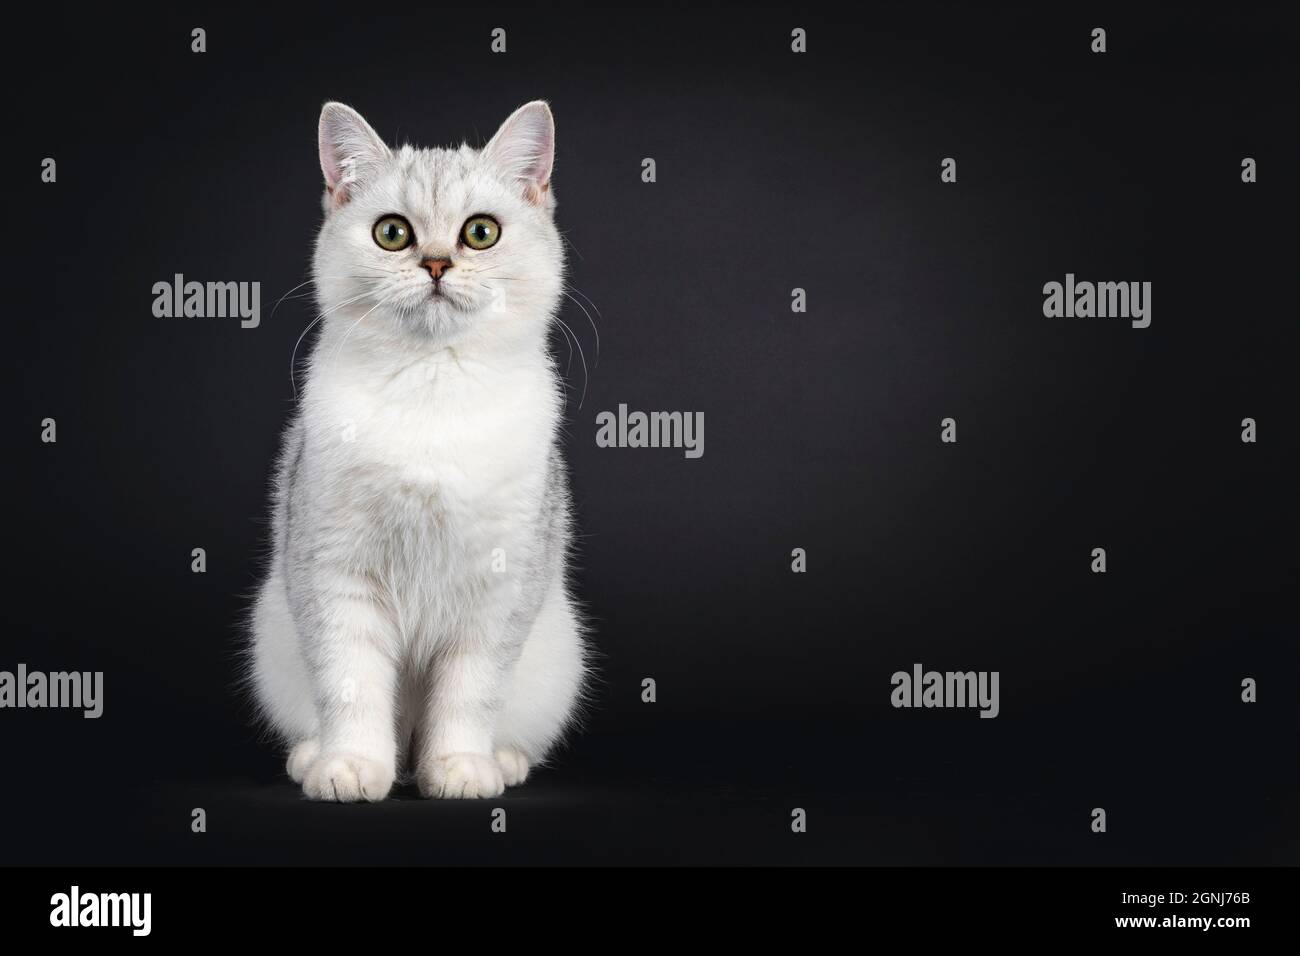 Cute silver shaded British Shorthair cat kitten, sitting facing front. Looking towards camera. Isolated on a black background. Stock Photo